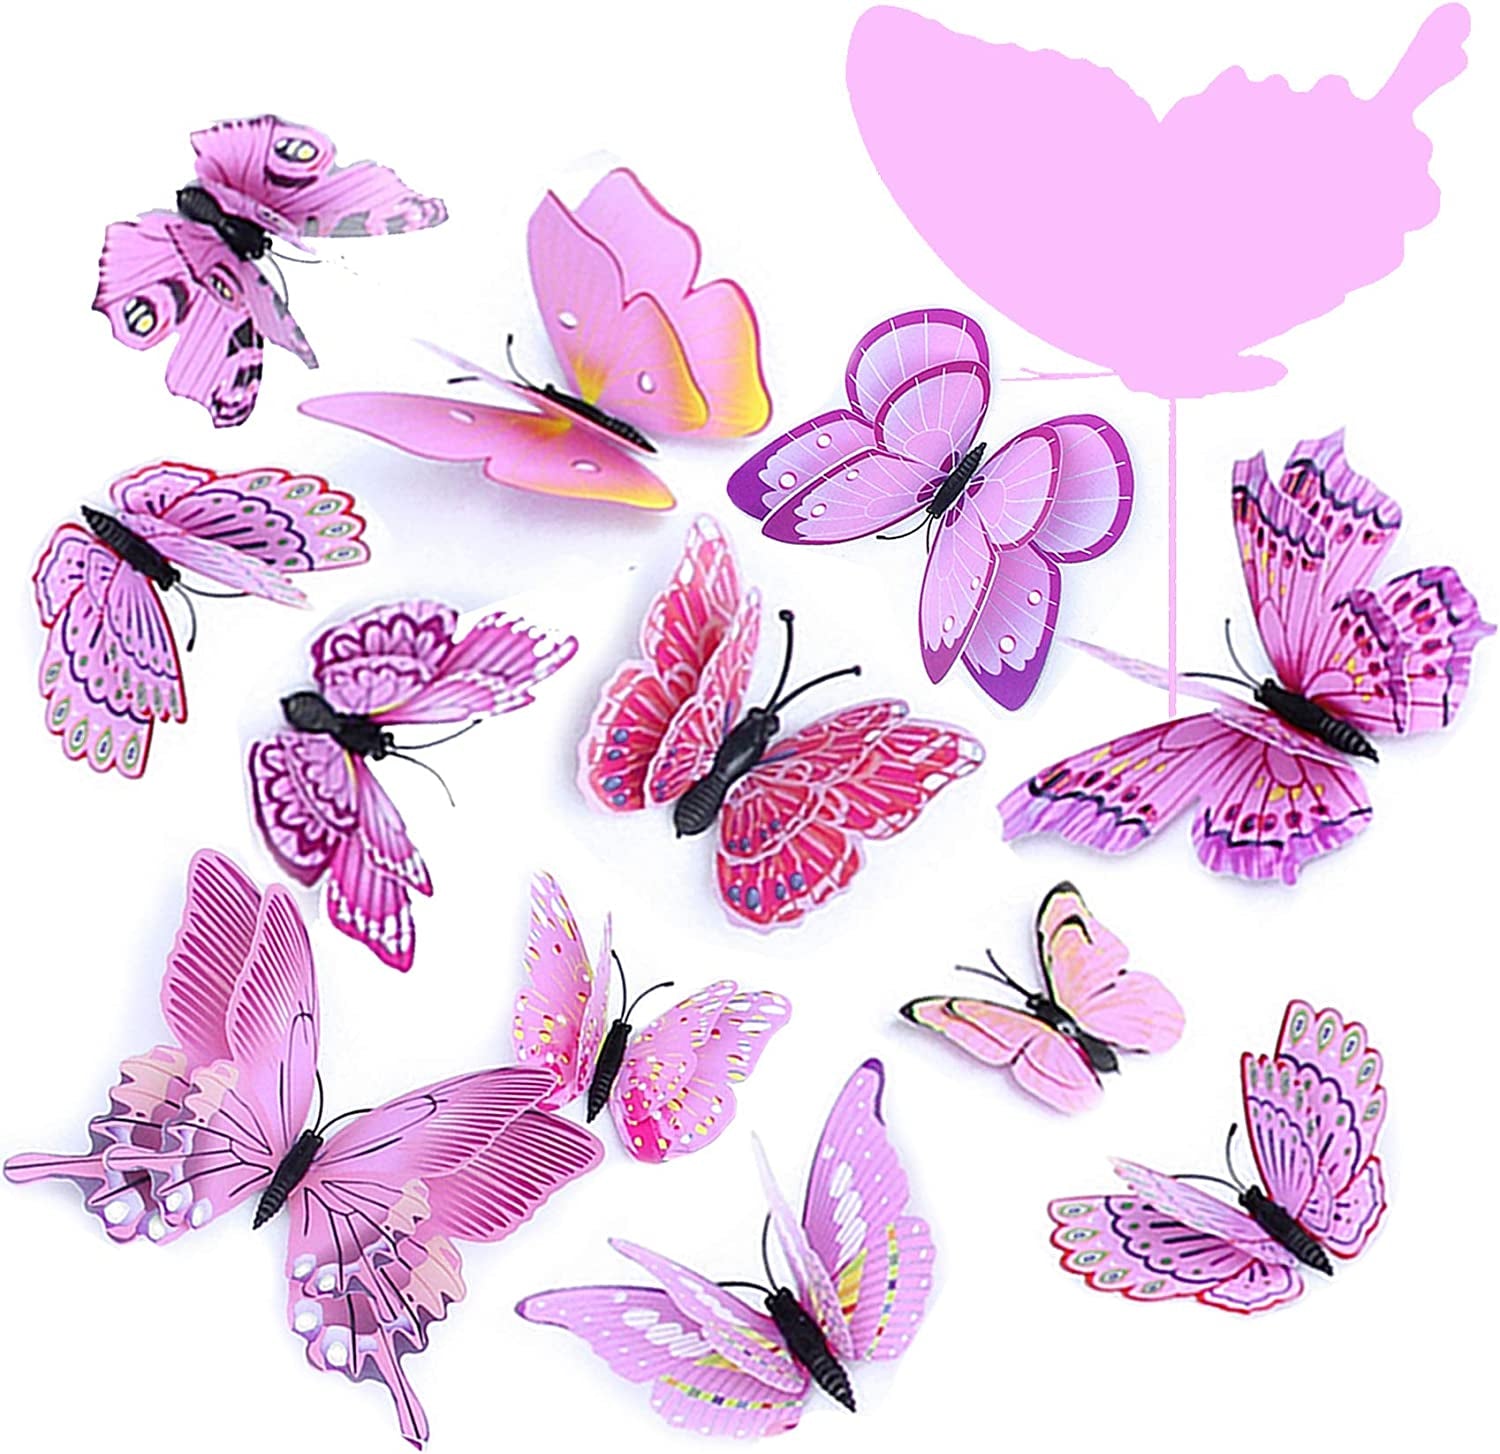 FENELY, FENELY Butterfly Garden Decor Stakes,Halloween Birthday Party Decorations Christmas Ornament Whimsical Gifts Waterproof 3D Butterflies Outdoor Accessories for Patio Lawn Yard PVC Gardening Art